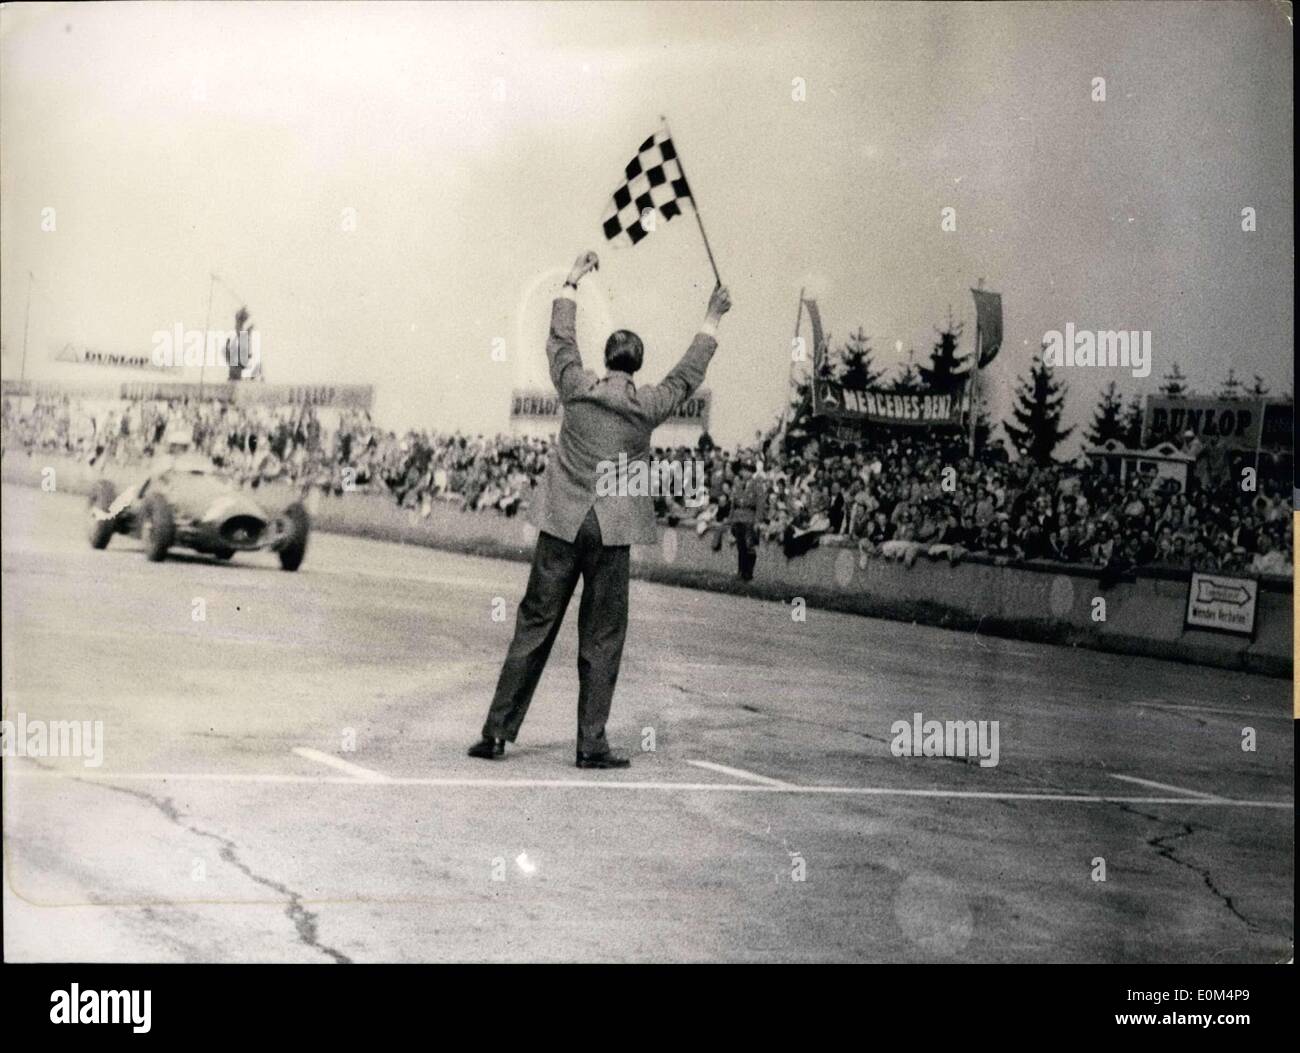 Aug. 03, 1953 - Pictured is racer Giuseppe Farina as he crosses the finish line in a race at Nuerburgring in Germany. Im Stock Photo